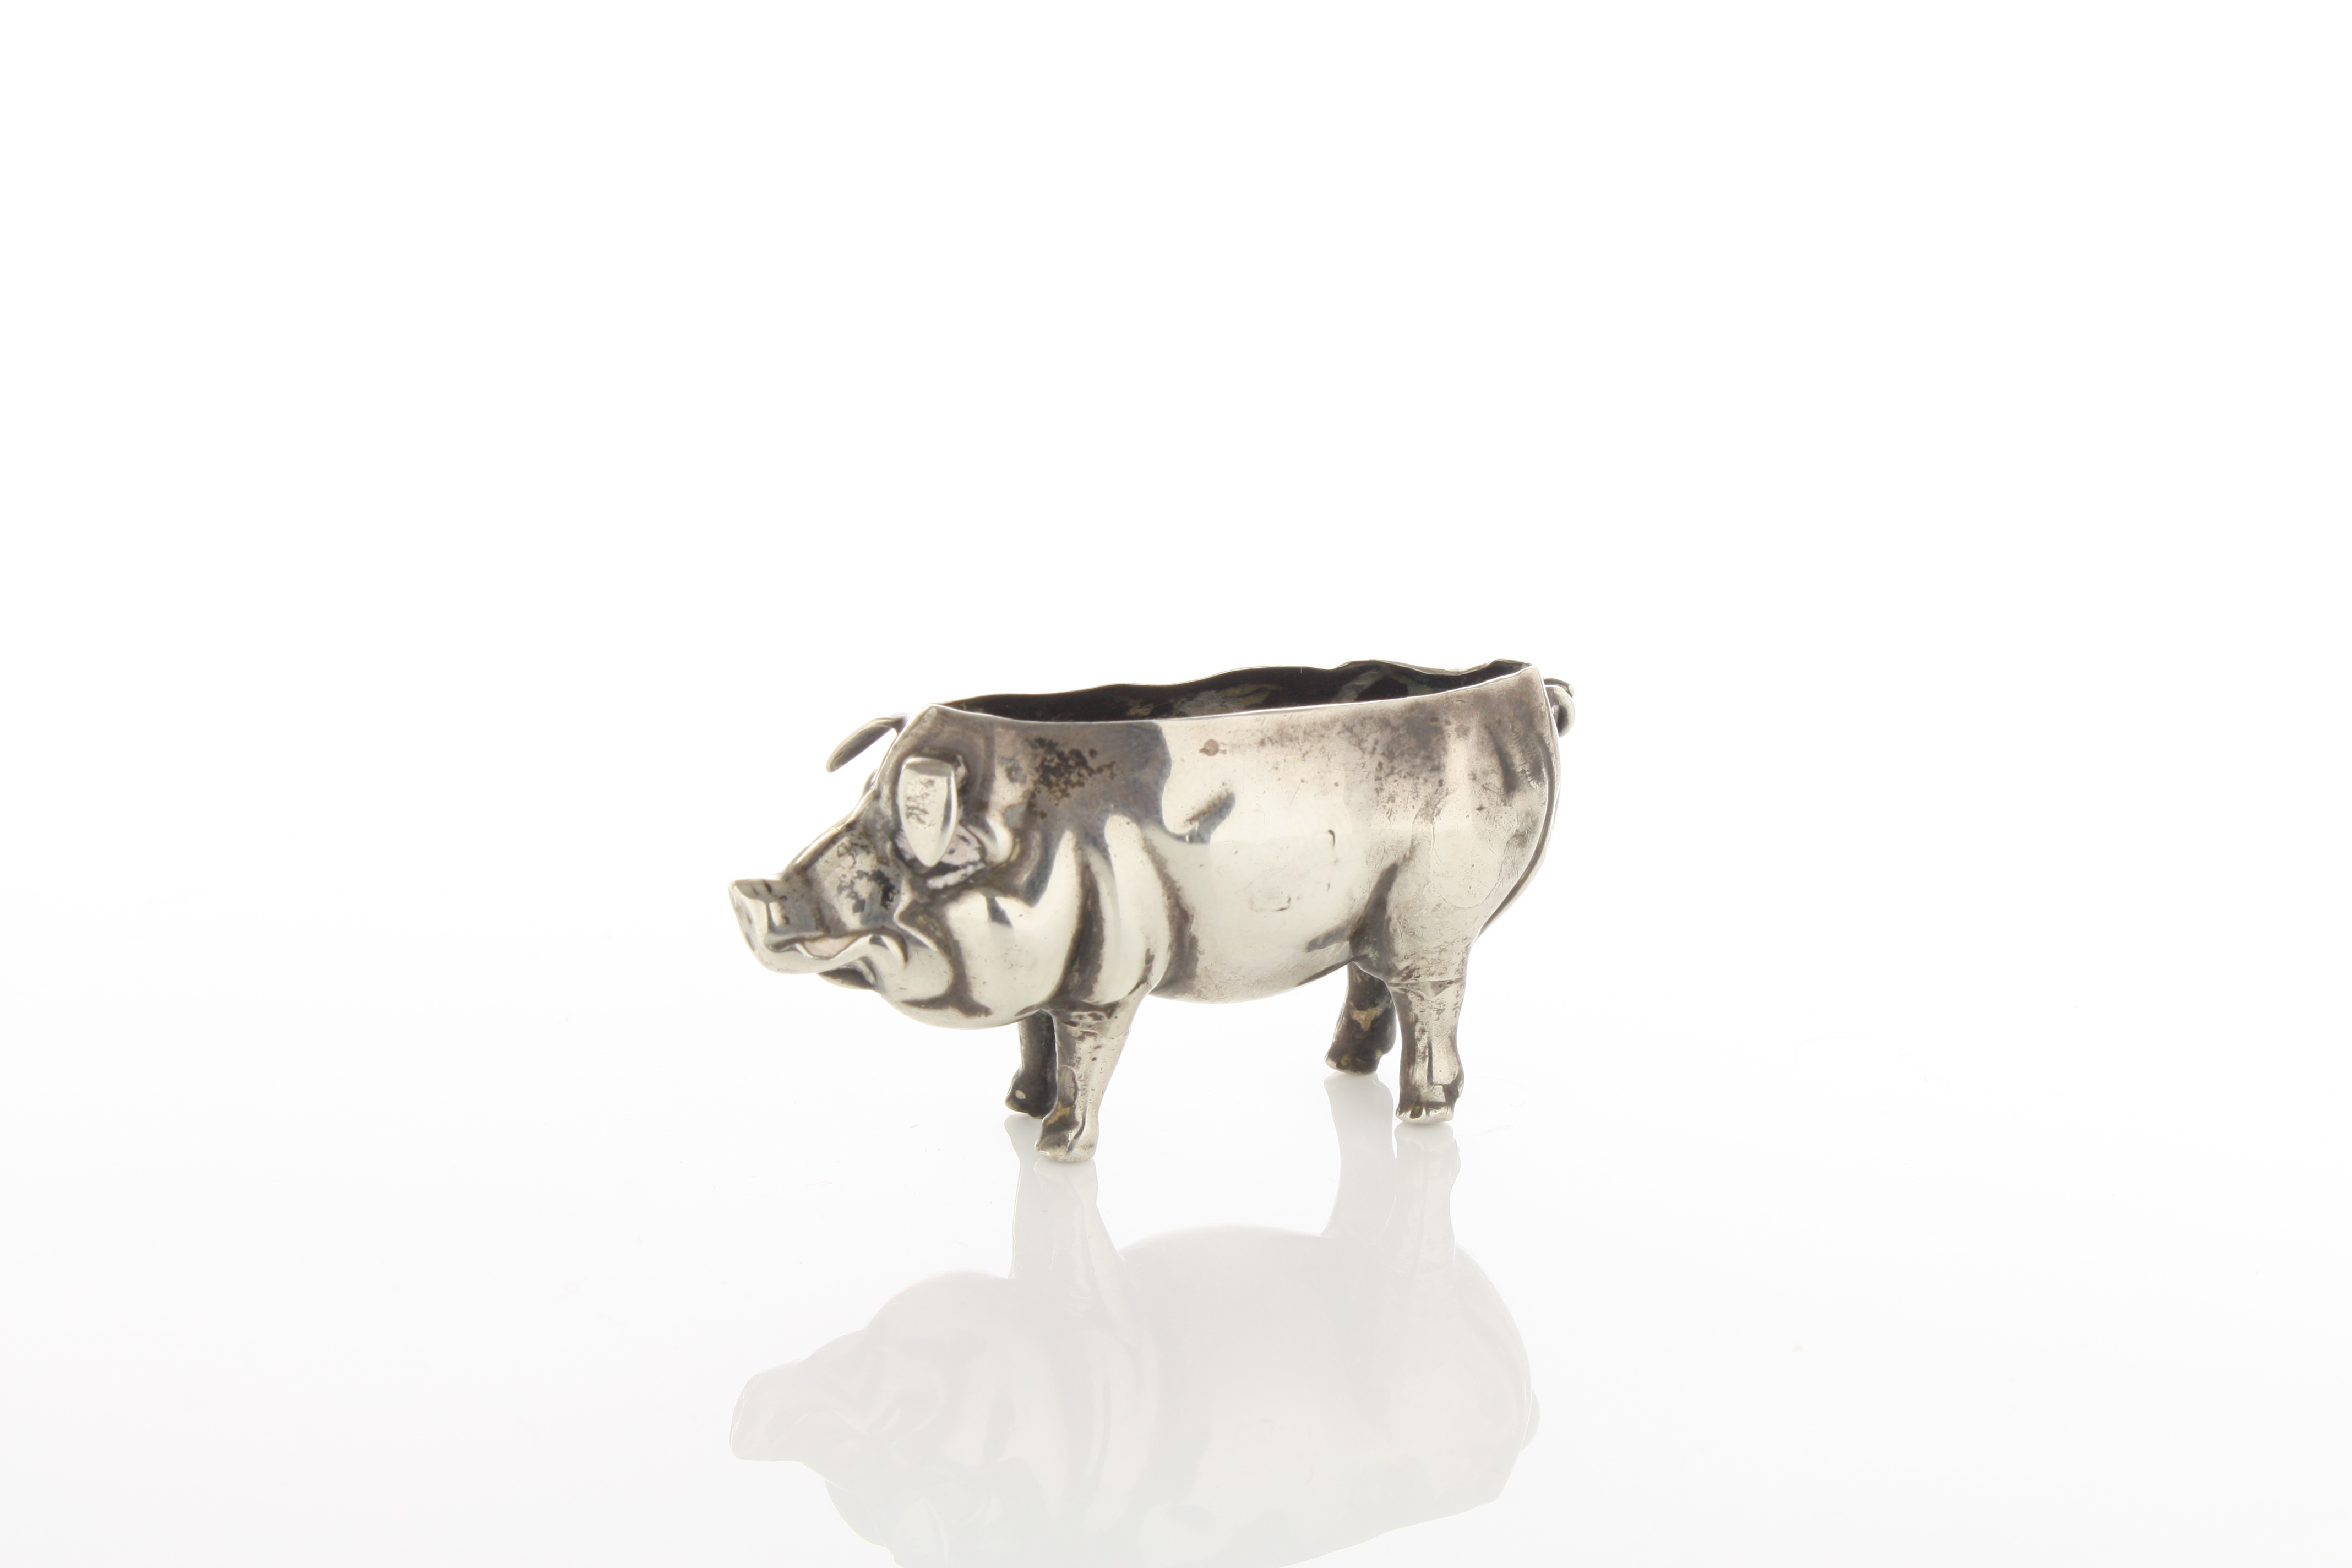 A silver pin cushion in the form of a pig, circa 1900, missing liner, rubbed mark, length 5.5cm